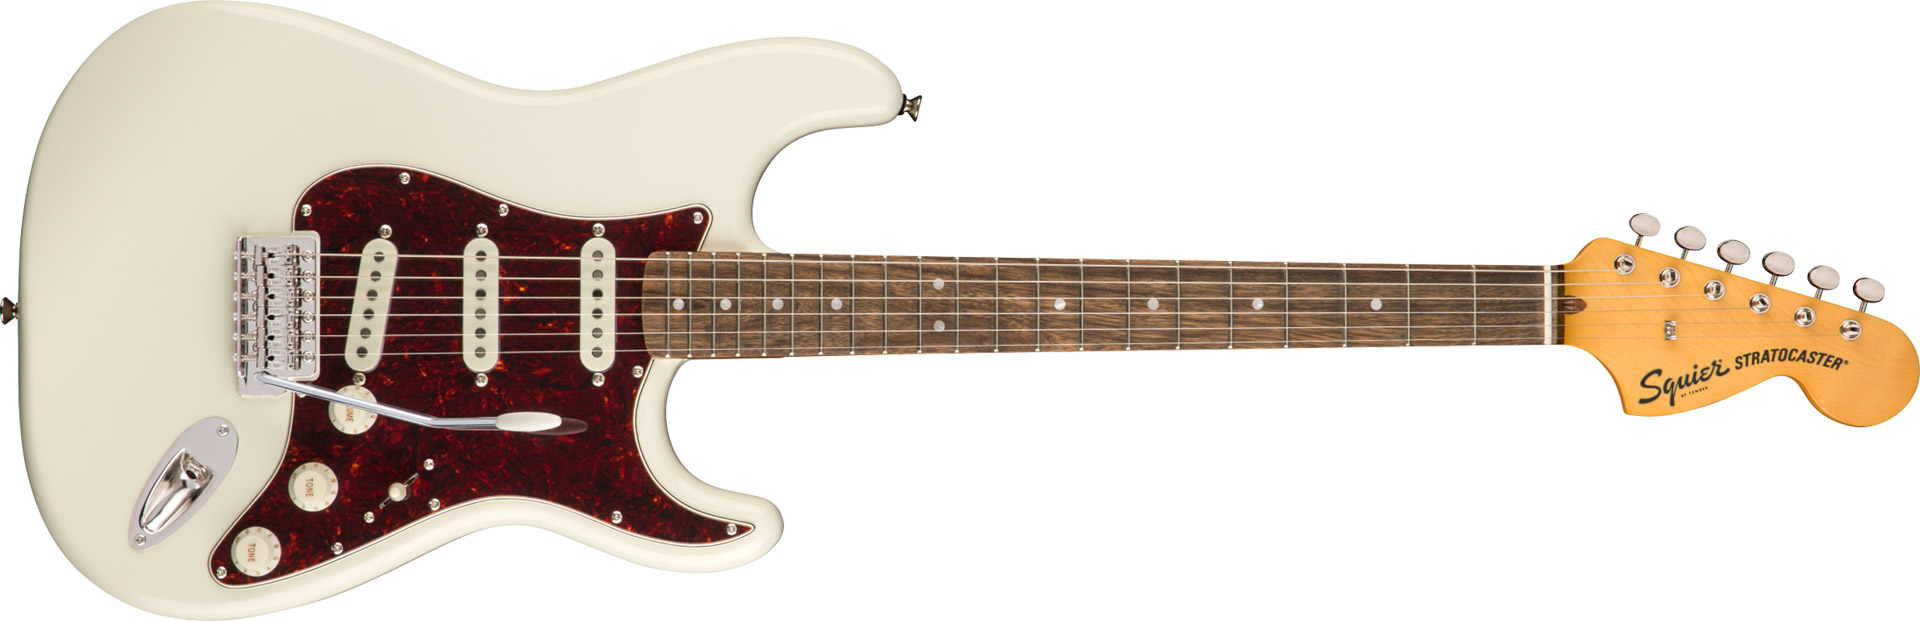 GUITARRA FENDER SQUIER CLASSIC VIBE 70S STRATOCASTER LR - 037-4020-501 - OLYMPIC WHITE